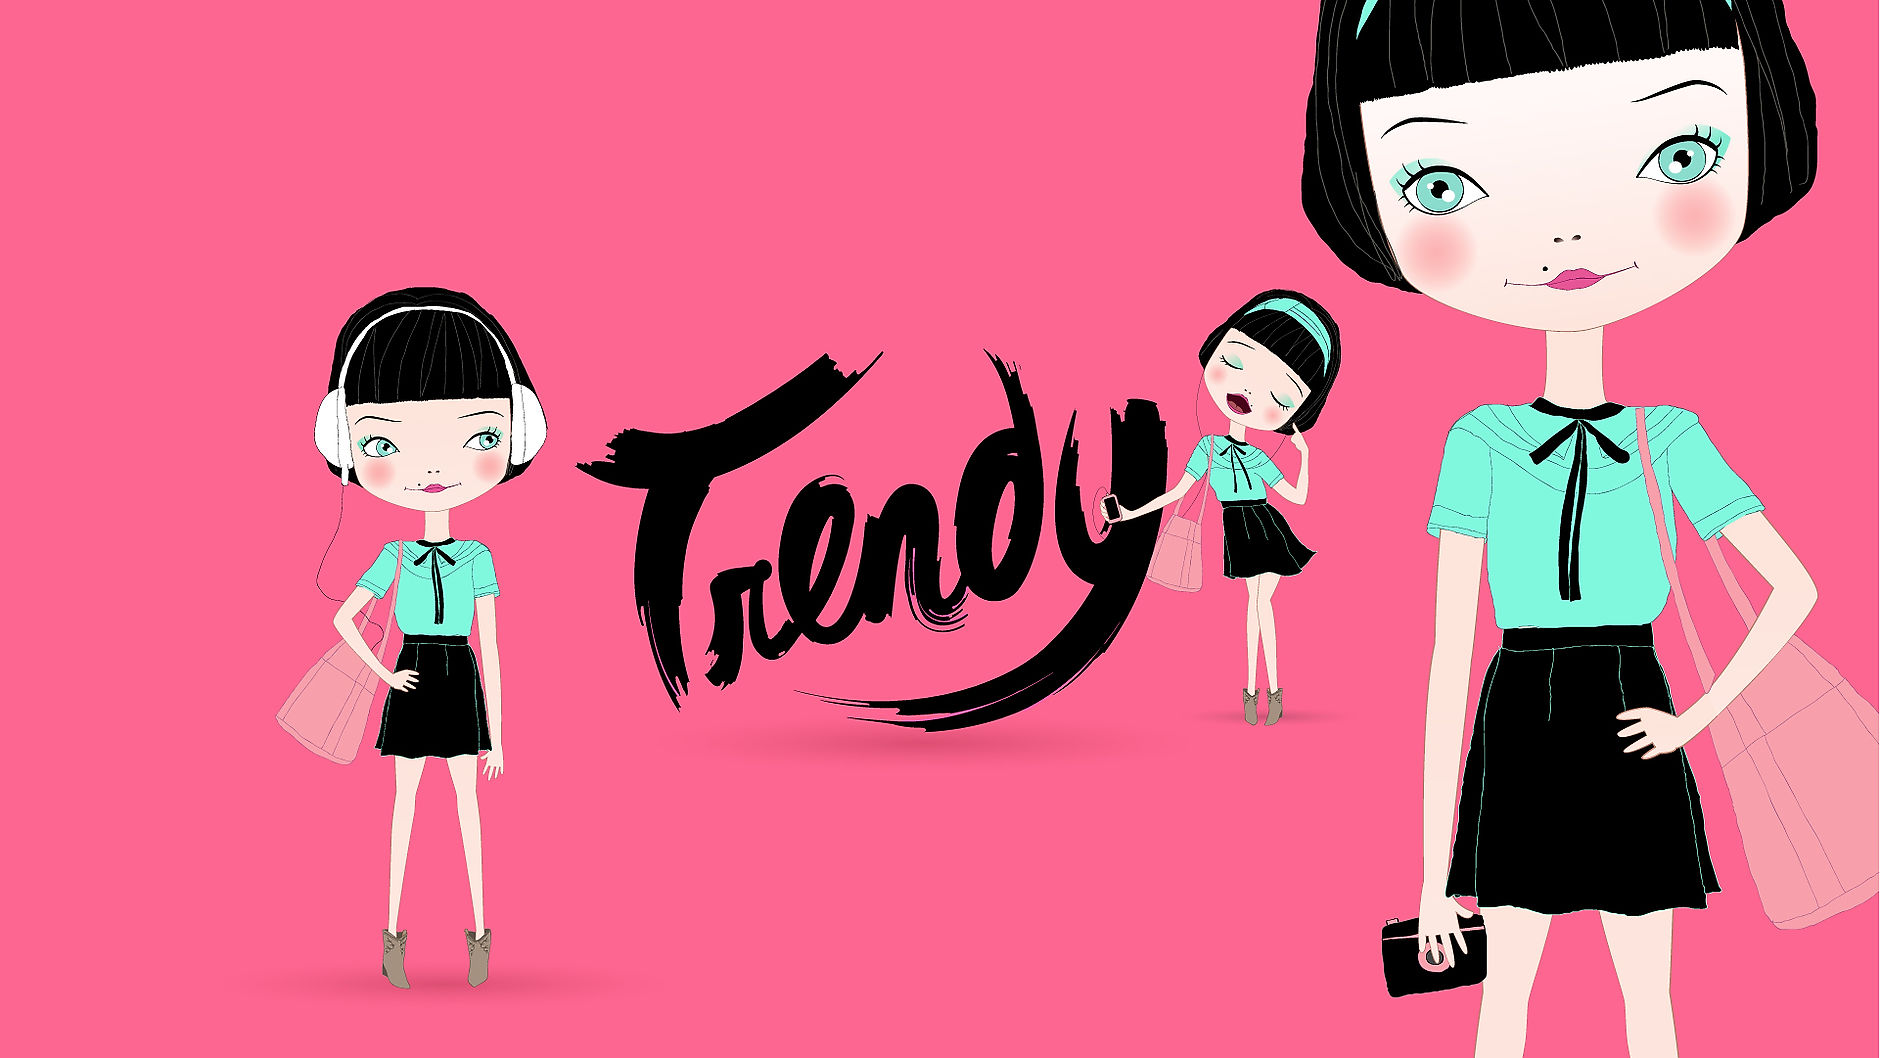 TRENDY by NICK